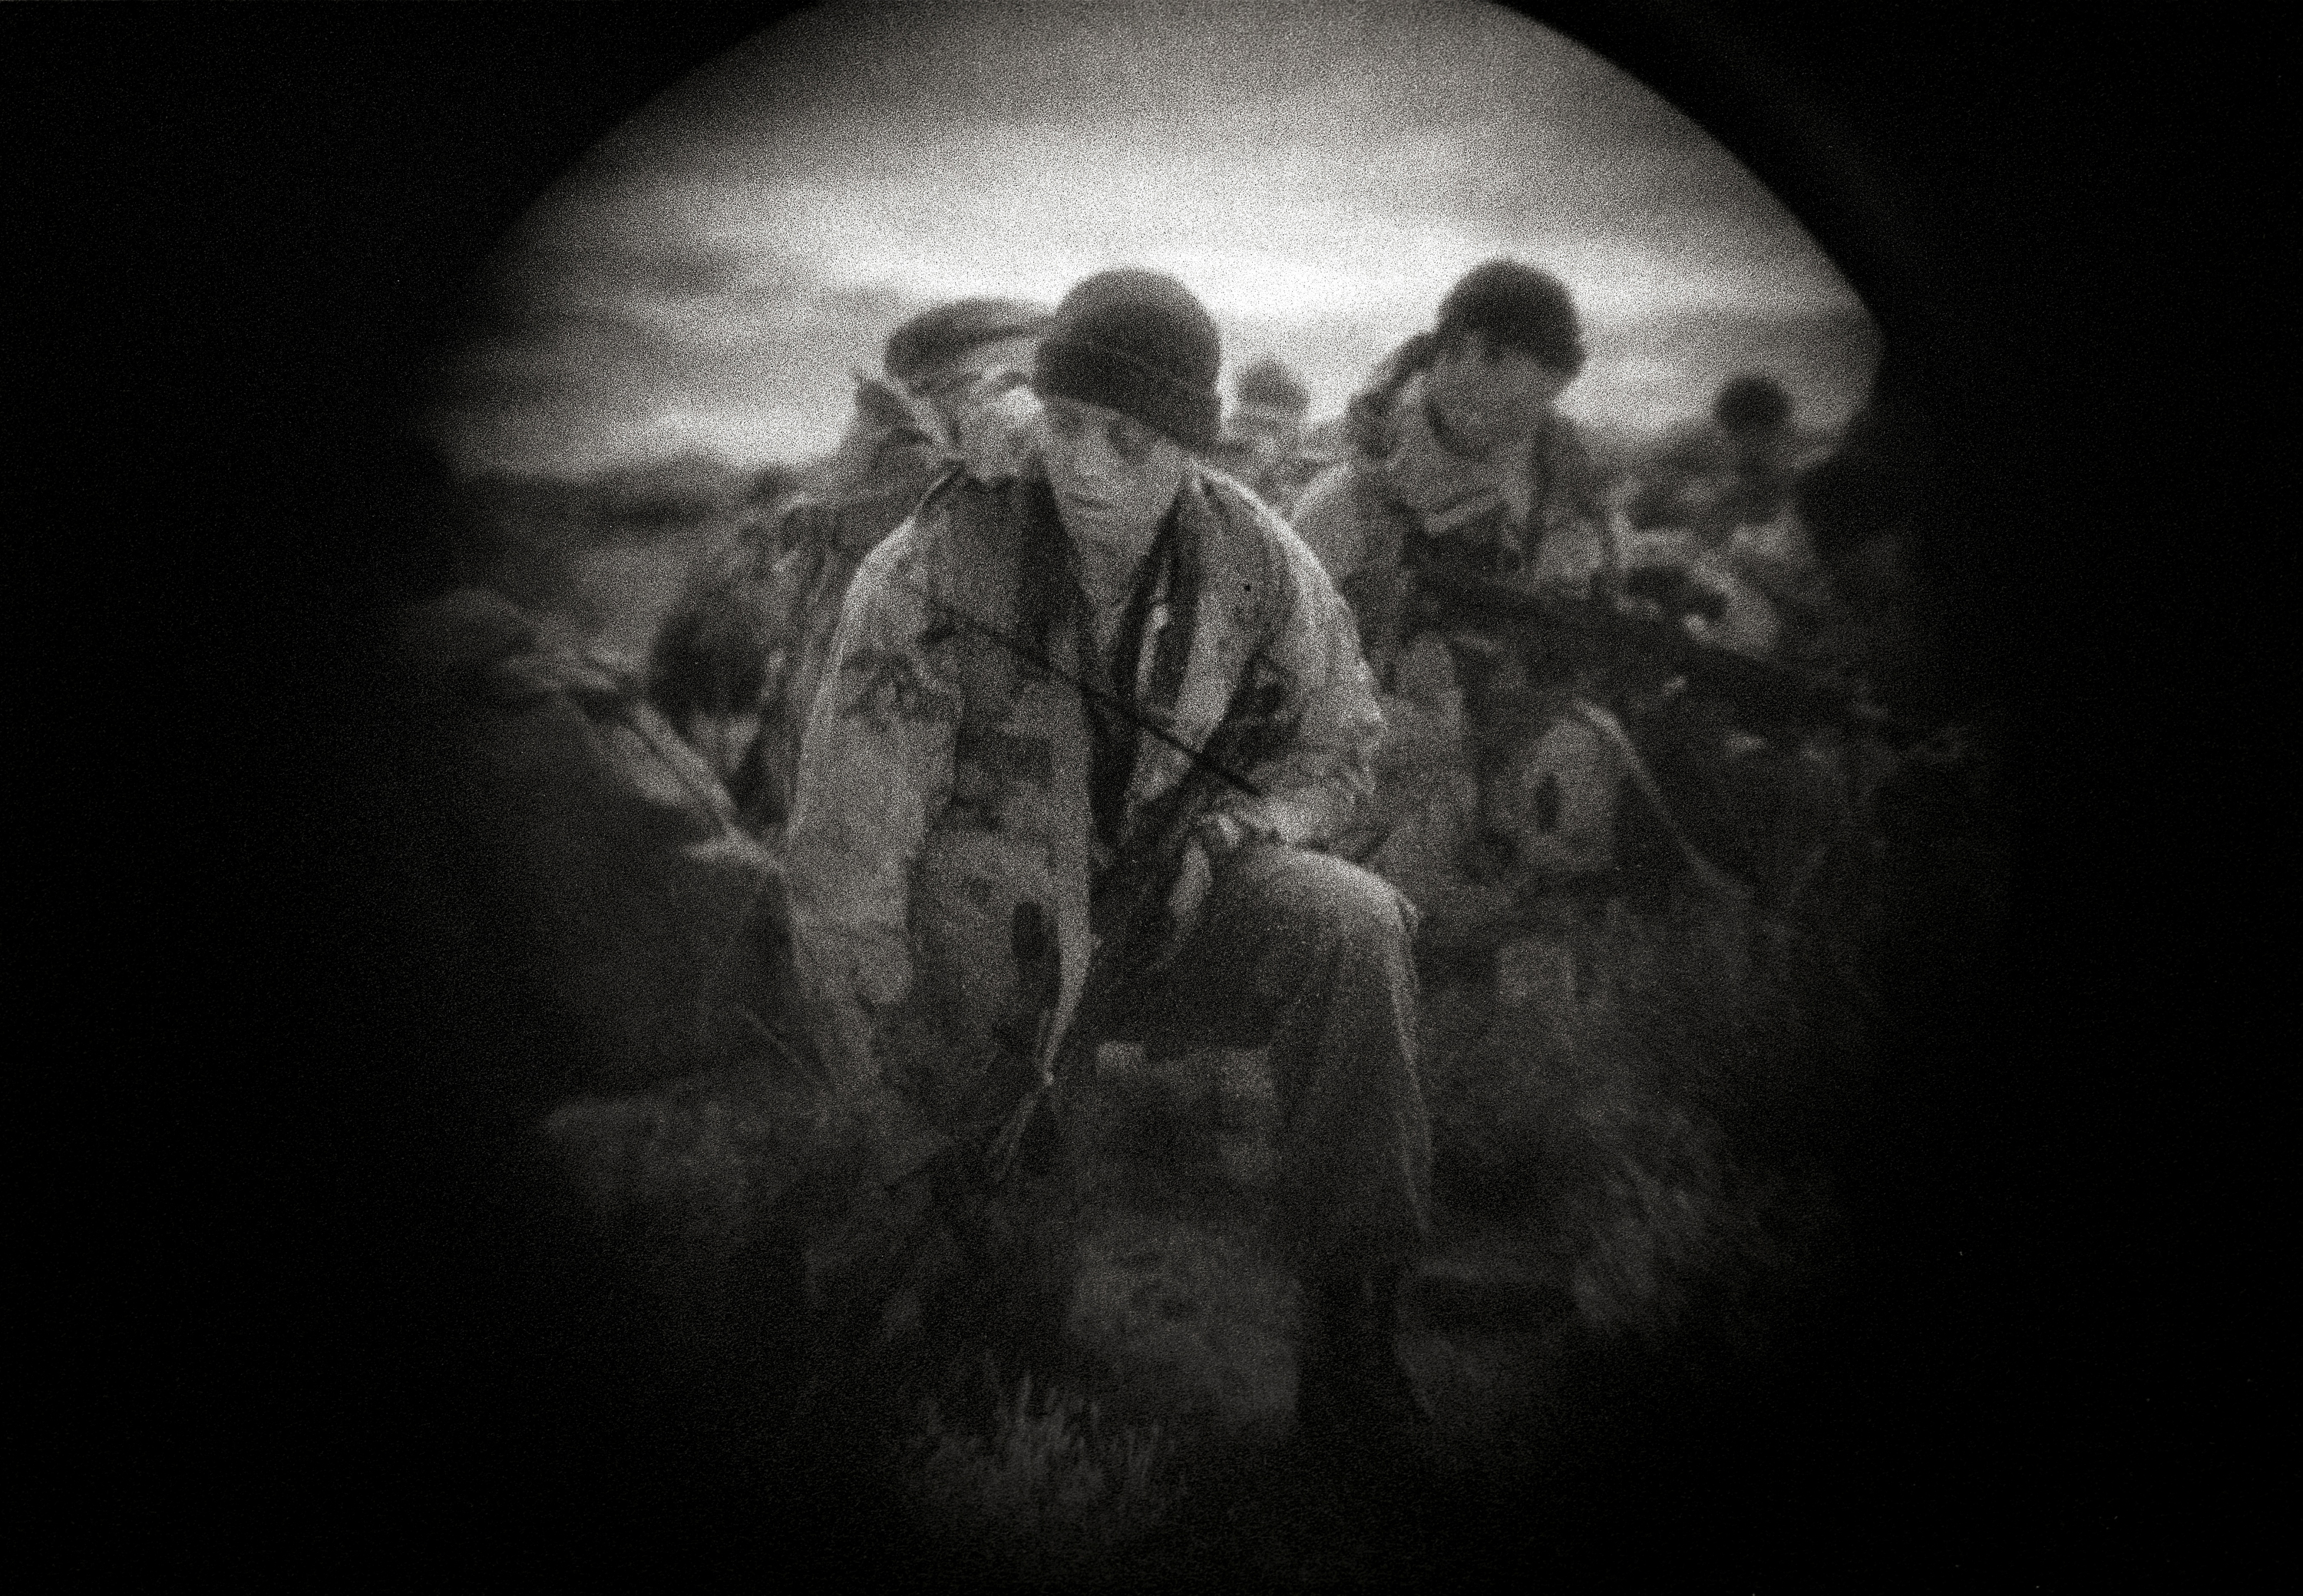 A night training operation by the United States Border Patrol Special Response Team Training in New Mexico. The photograph was made through night vision glasses.